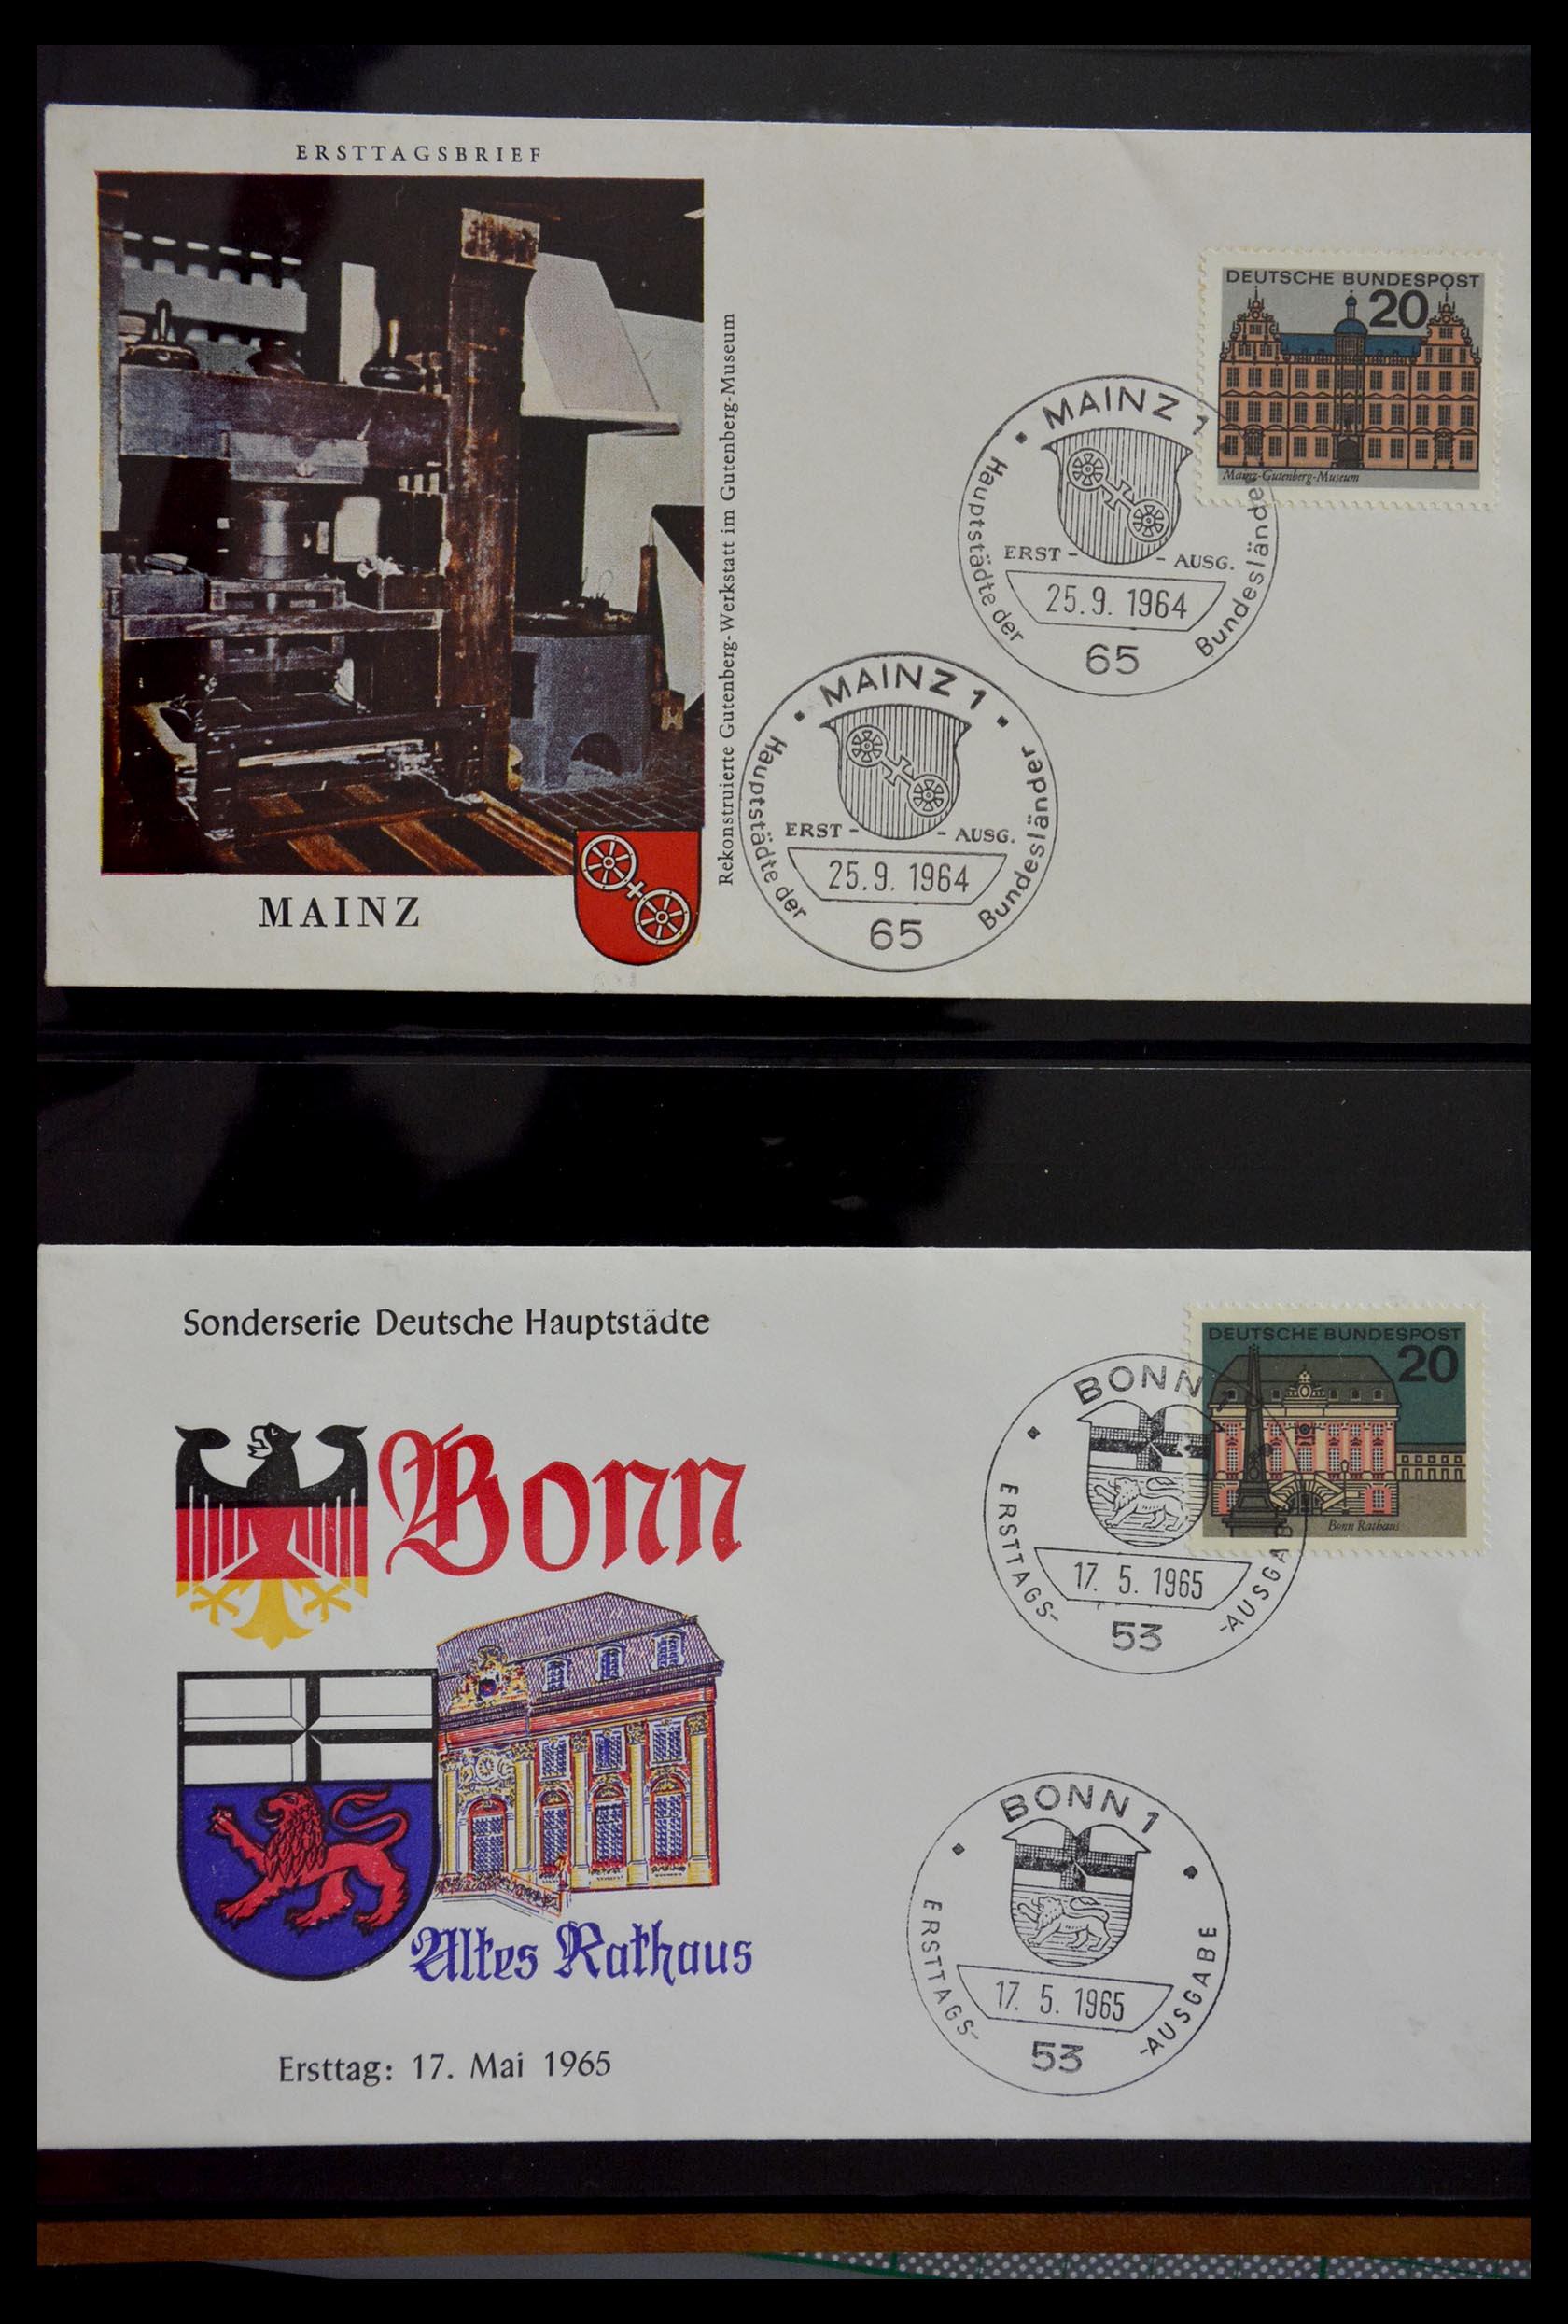 29382 030 - 29382 Germany covers and FDC's 1936-1965.